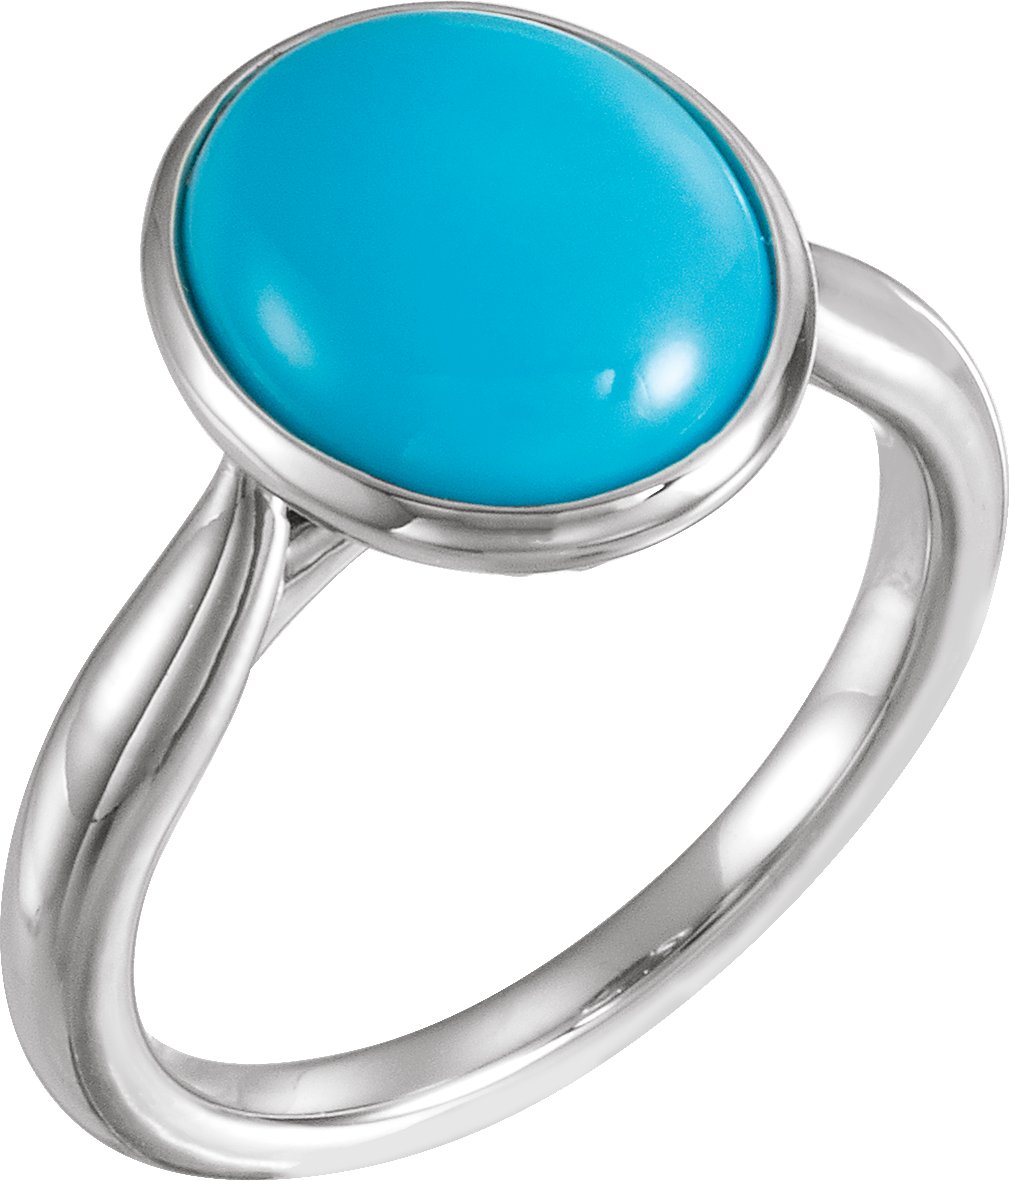 14K White 12x10 mm Natural Turquoise Cabochon Ring